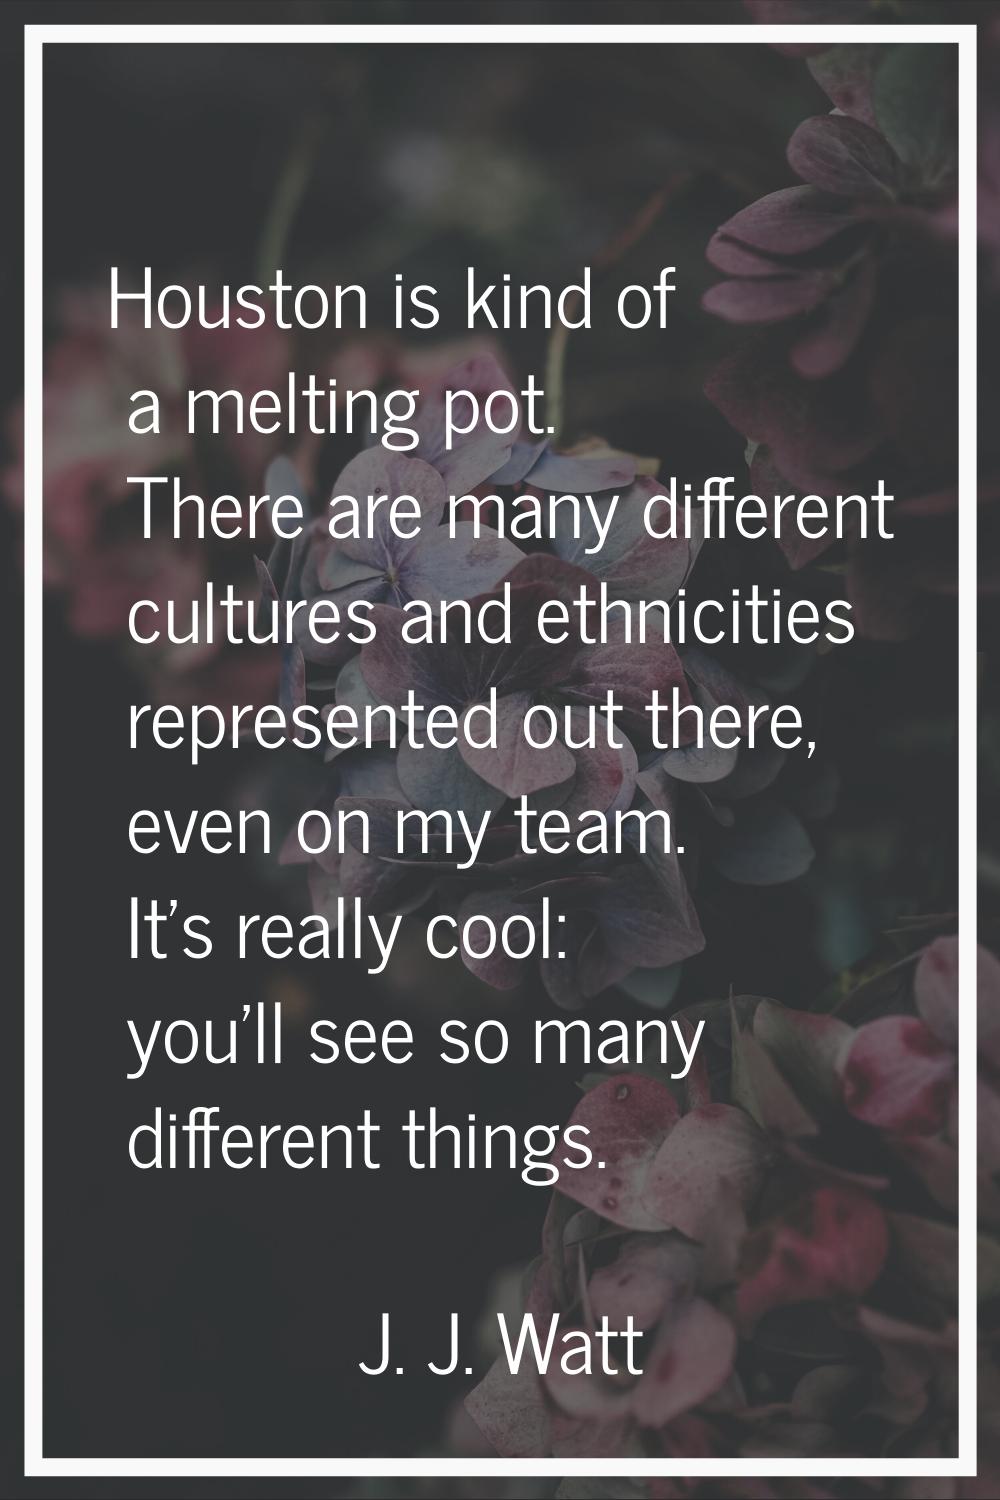 Houston is kind of a melting pot. There are many different cultures and ethnicities represented out